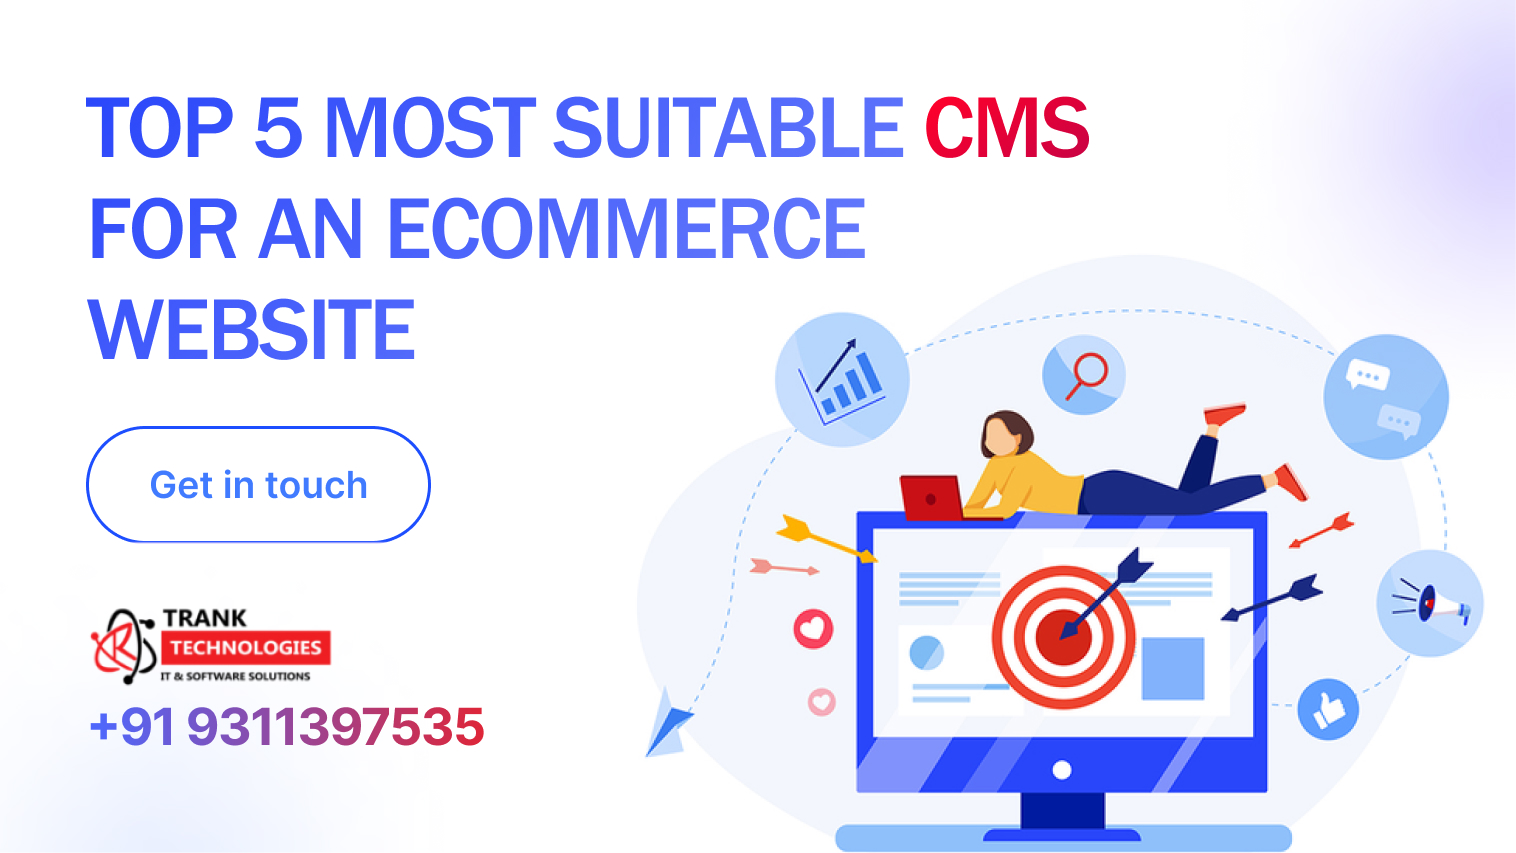 CMS Options for An eCommerce Website